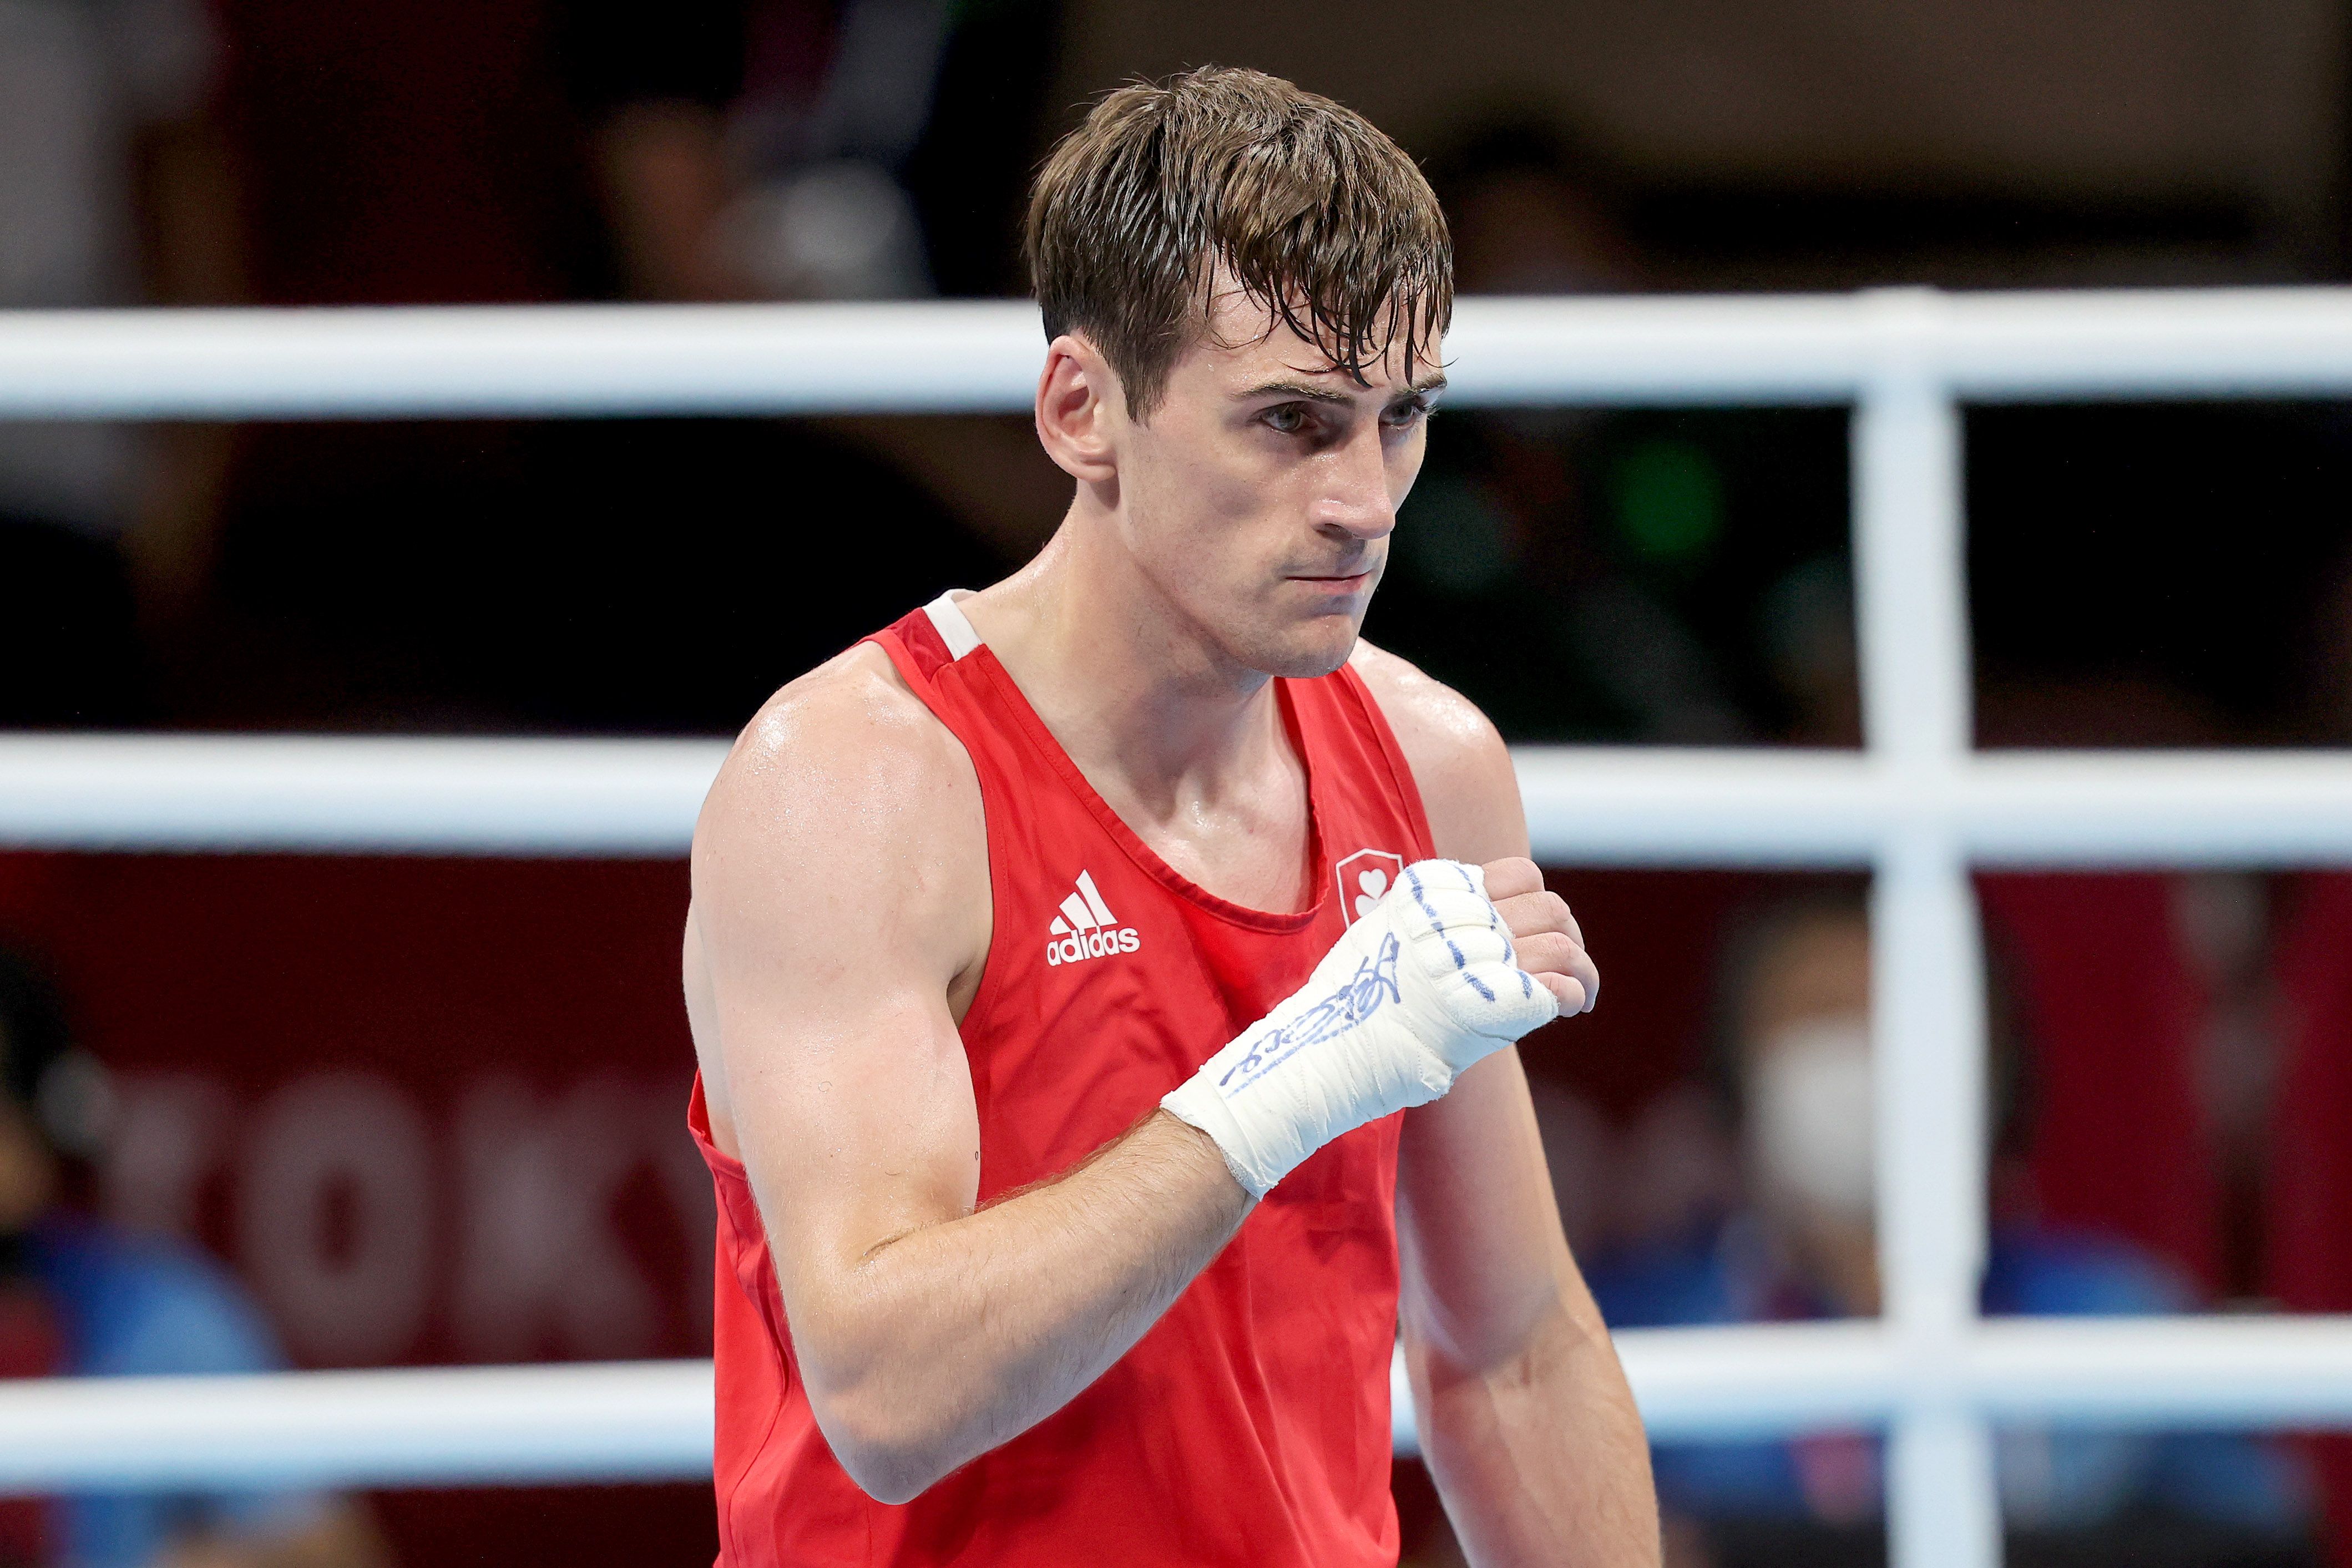 Aidan Walsh is back in action on Thursday against Brazil\'s Wanderson De Oliveira